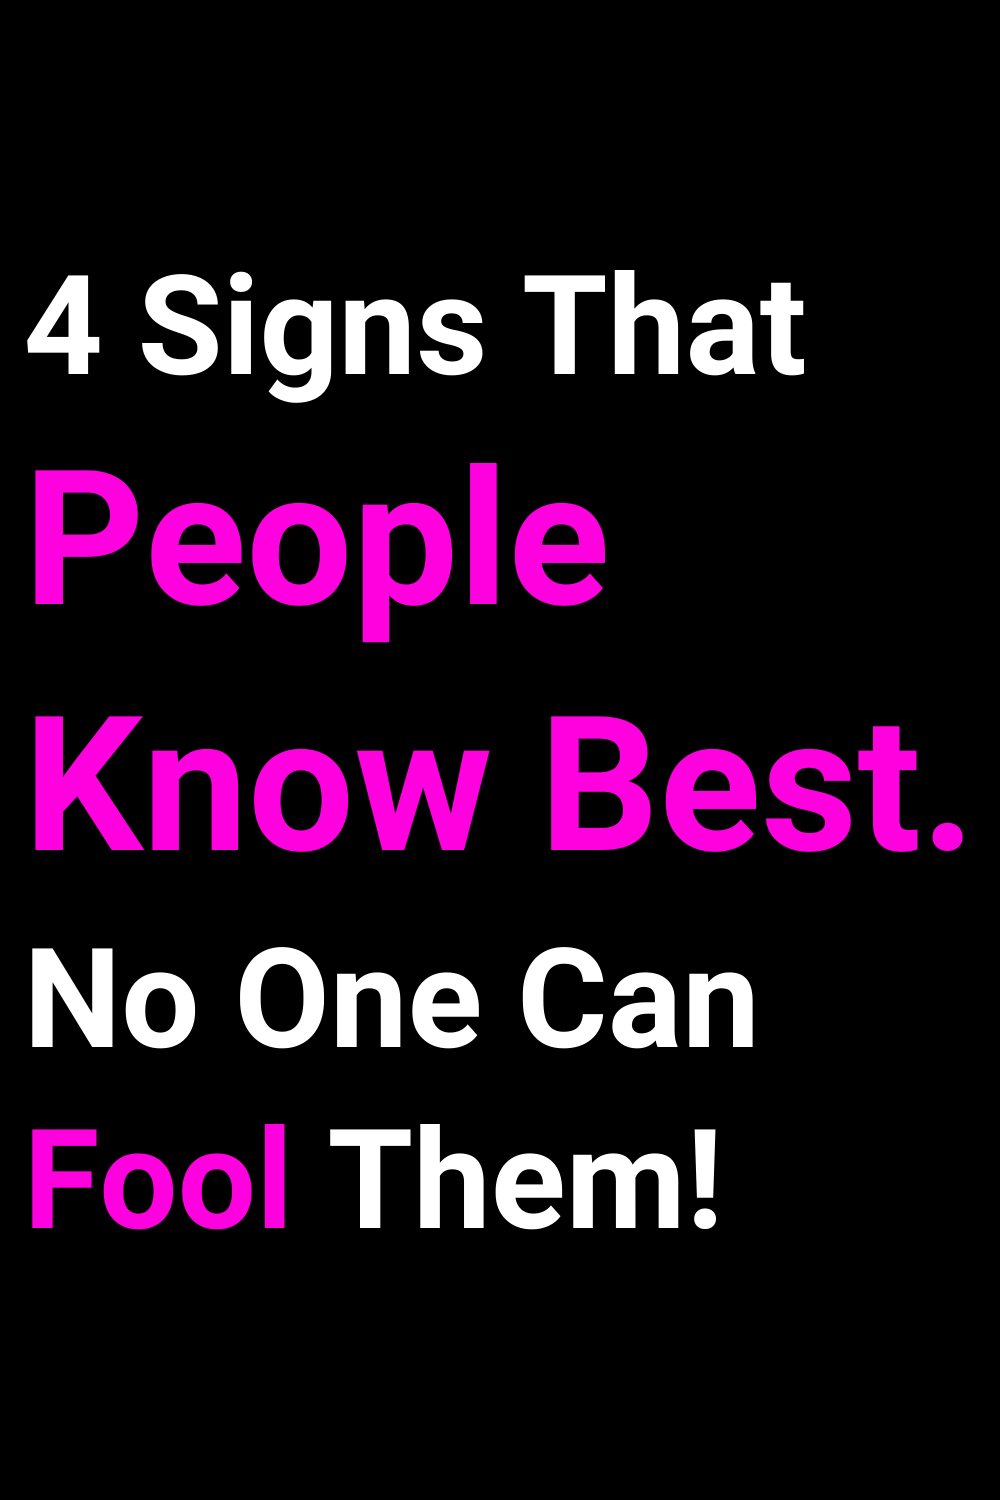 4 Signs That People Know Best. No One Can Fool Them!